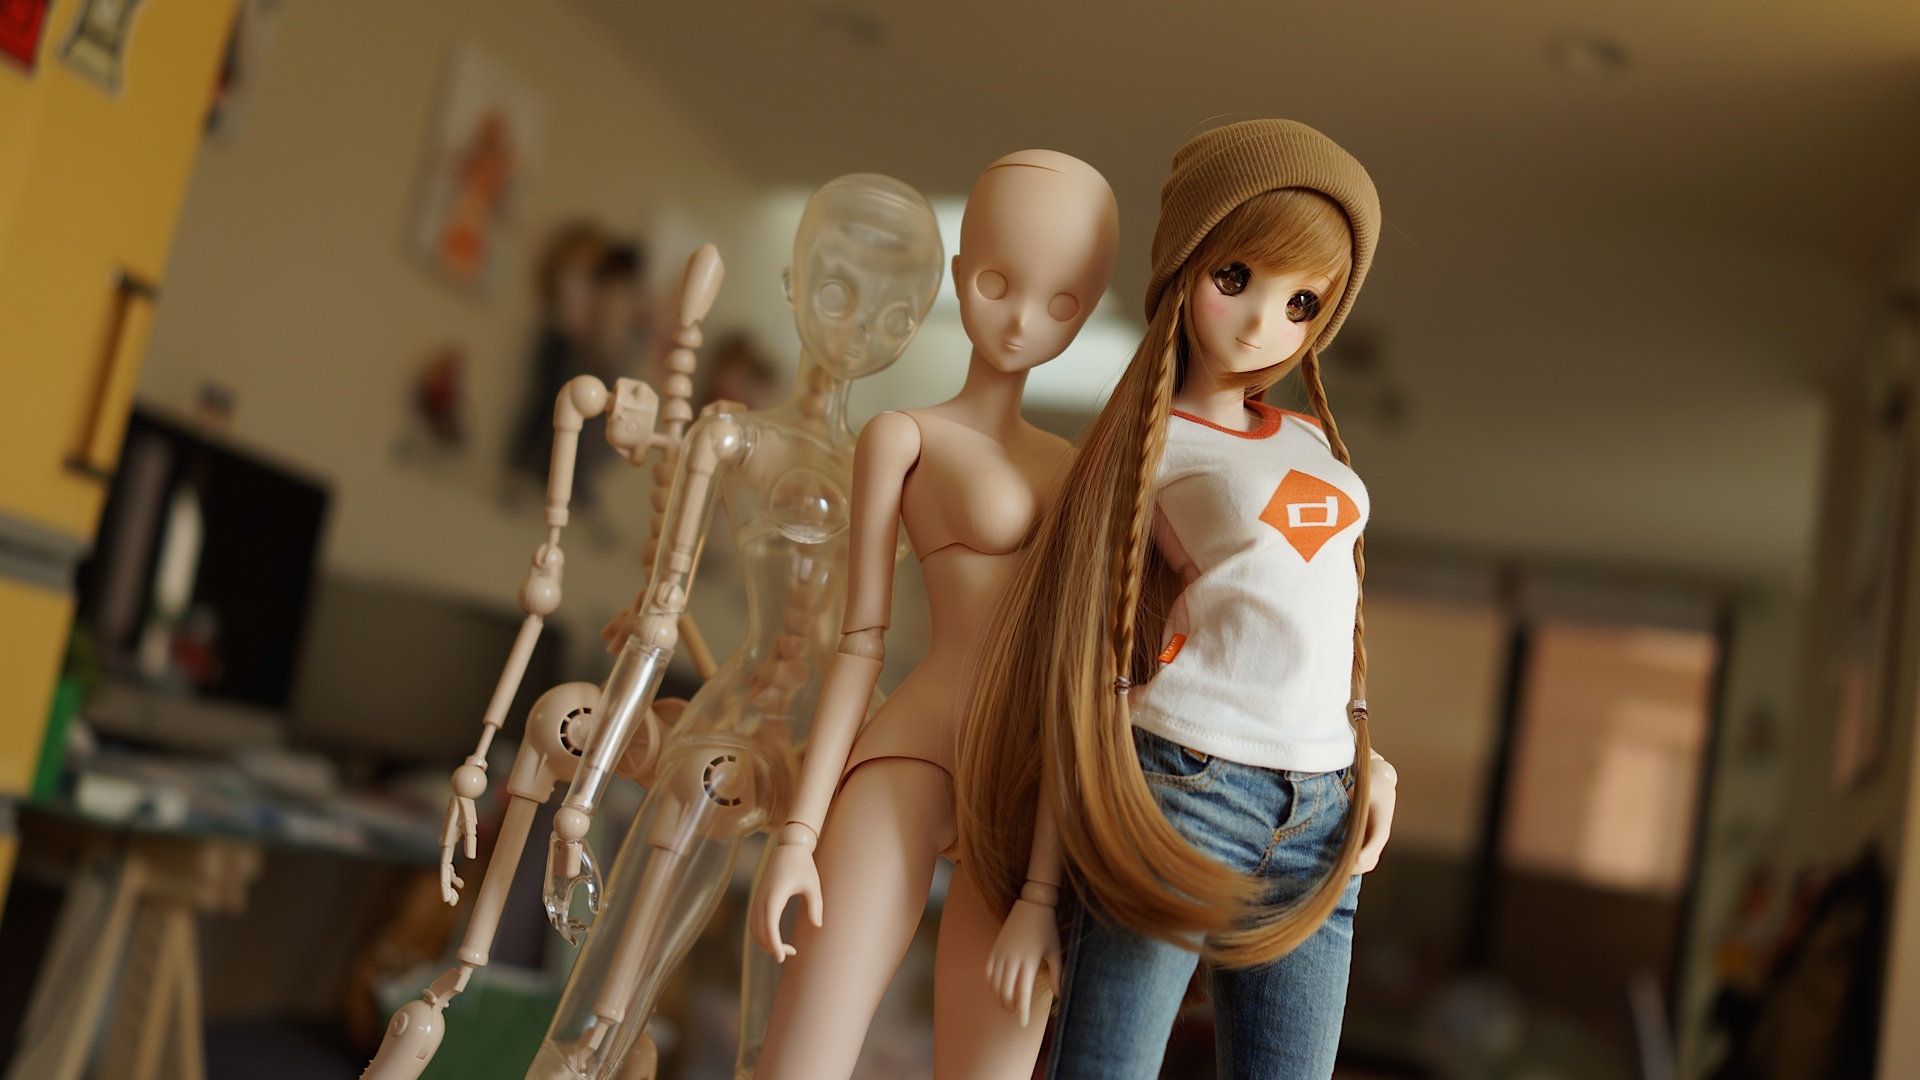 Re: Danny Choo Smart Doll now available.